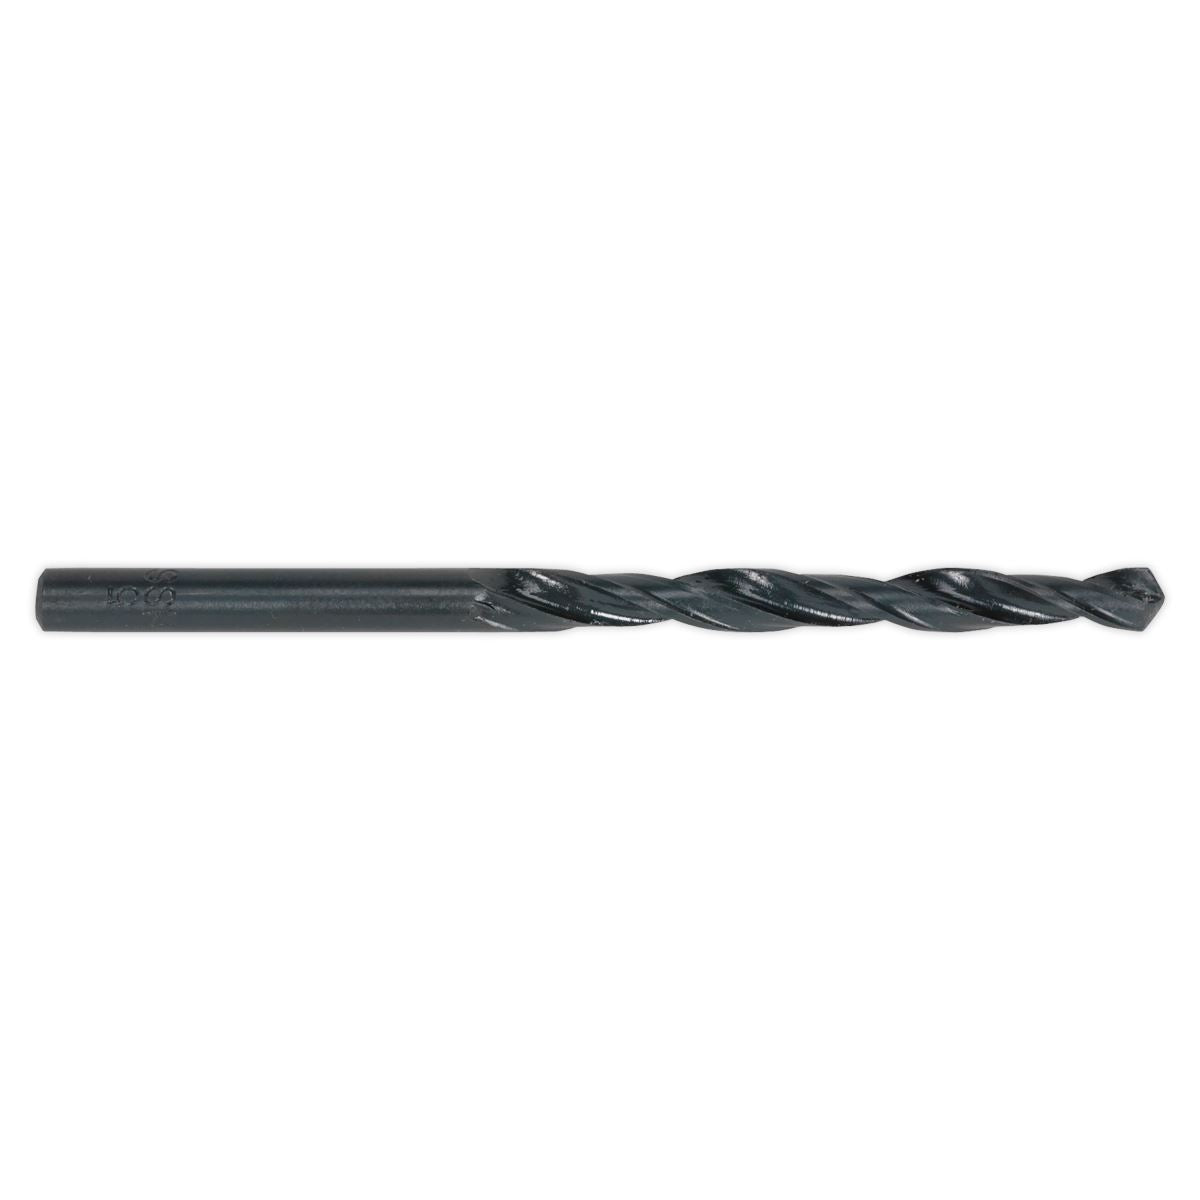 Sealey HSS Roll Forged Drill Bit Ø8mm Pack of 10